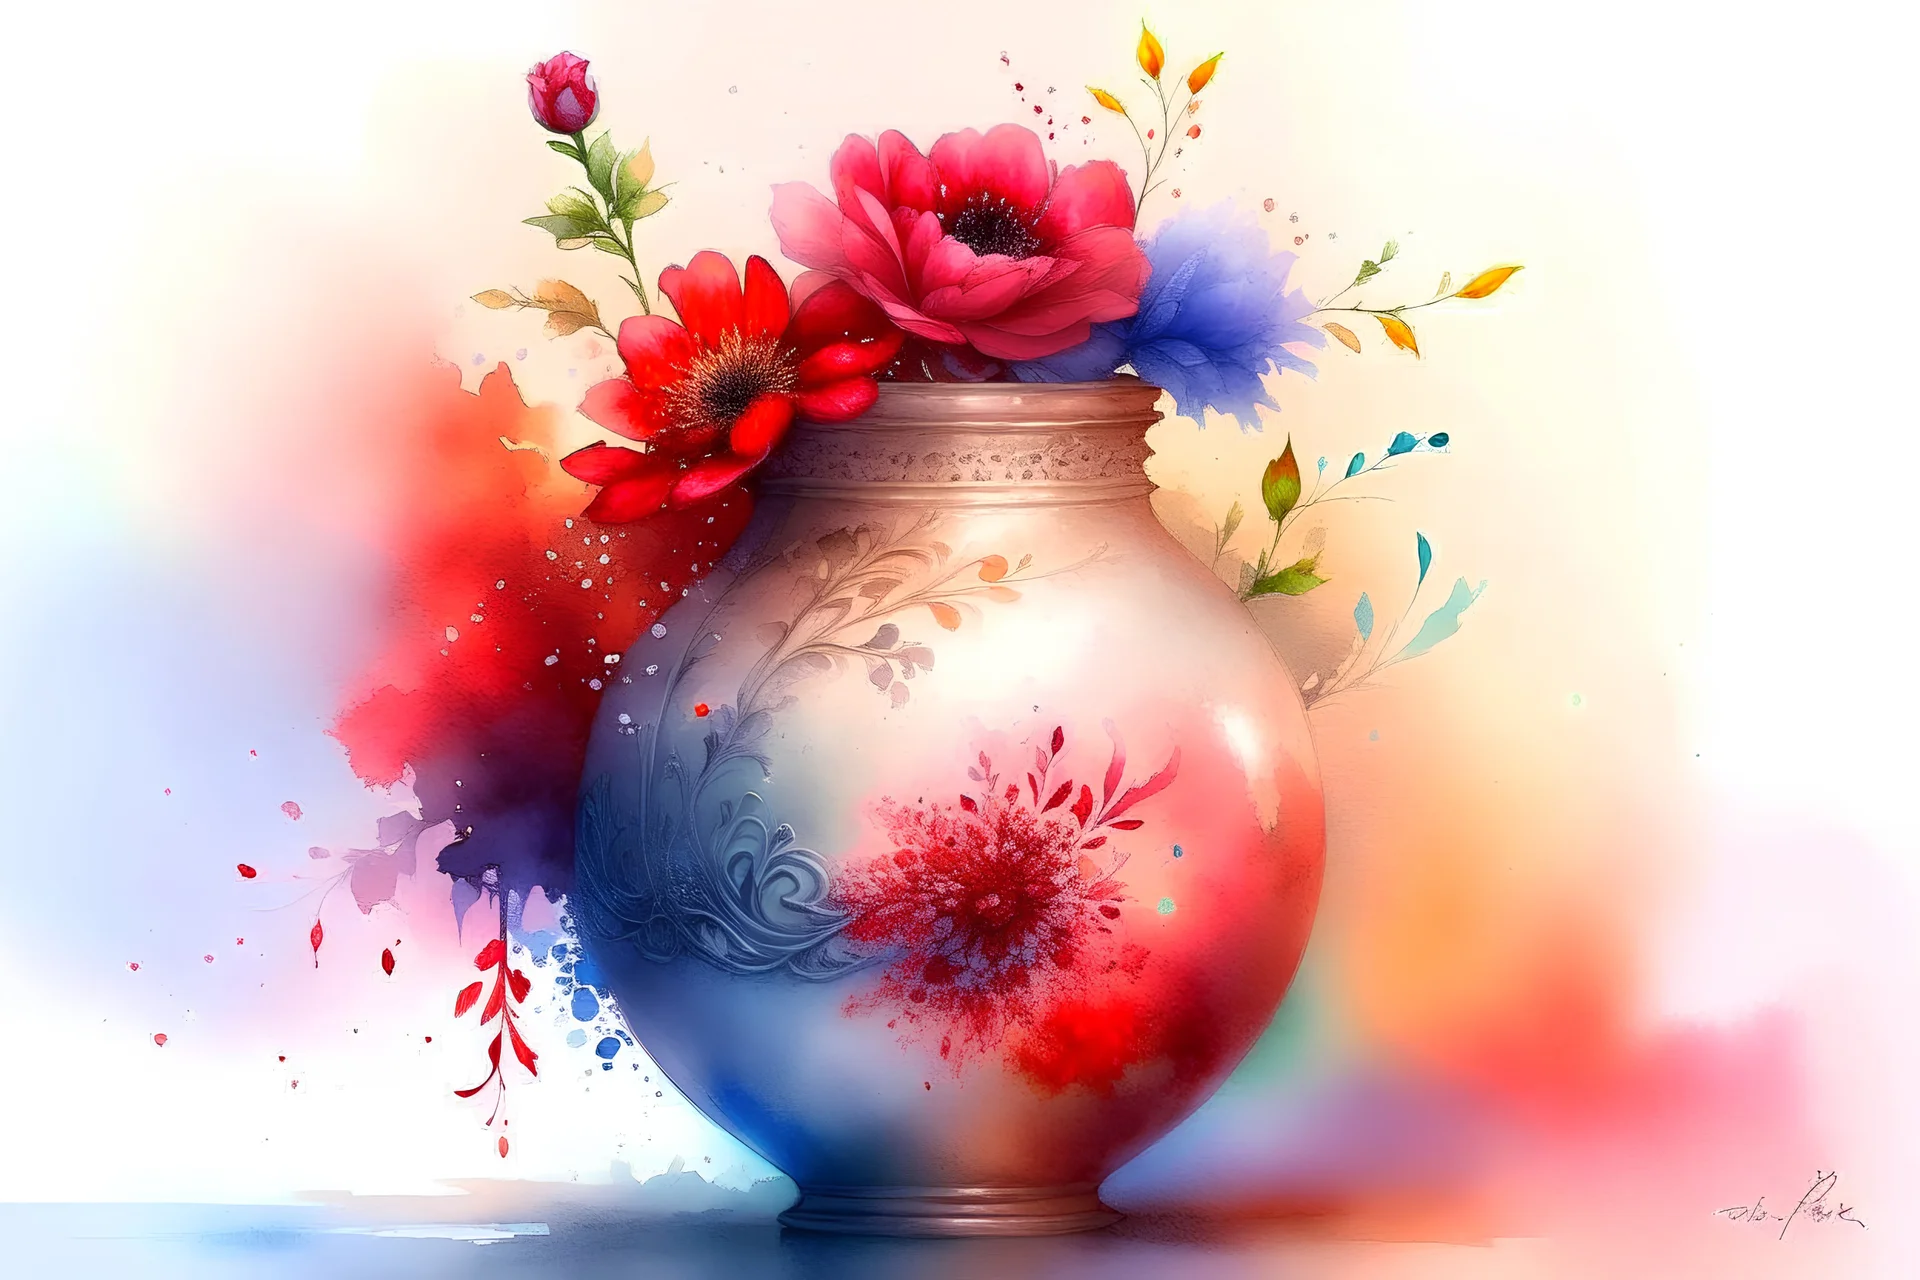 watercolor draw a vase, aztec with flowers, white lace and rubies, white background, Trending on Artstation, {creative commons}, fanart, AIart, {Woolitize}, by Charlie Bowater, Illustration